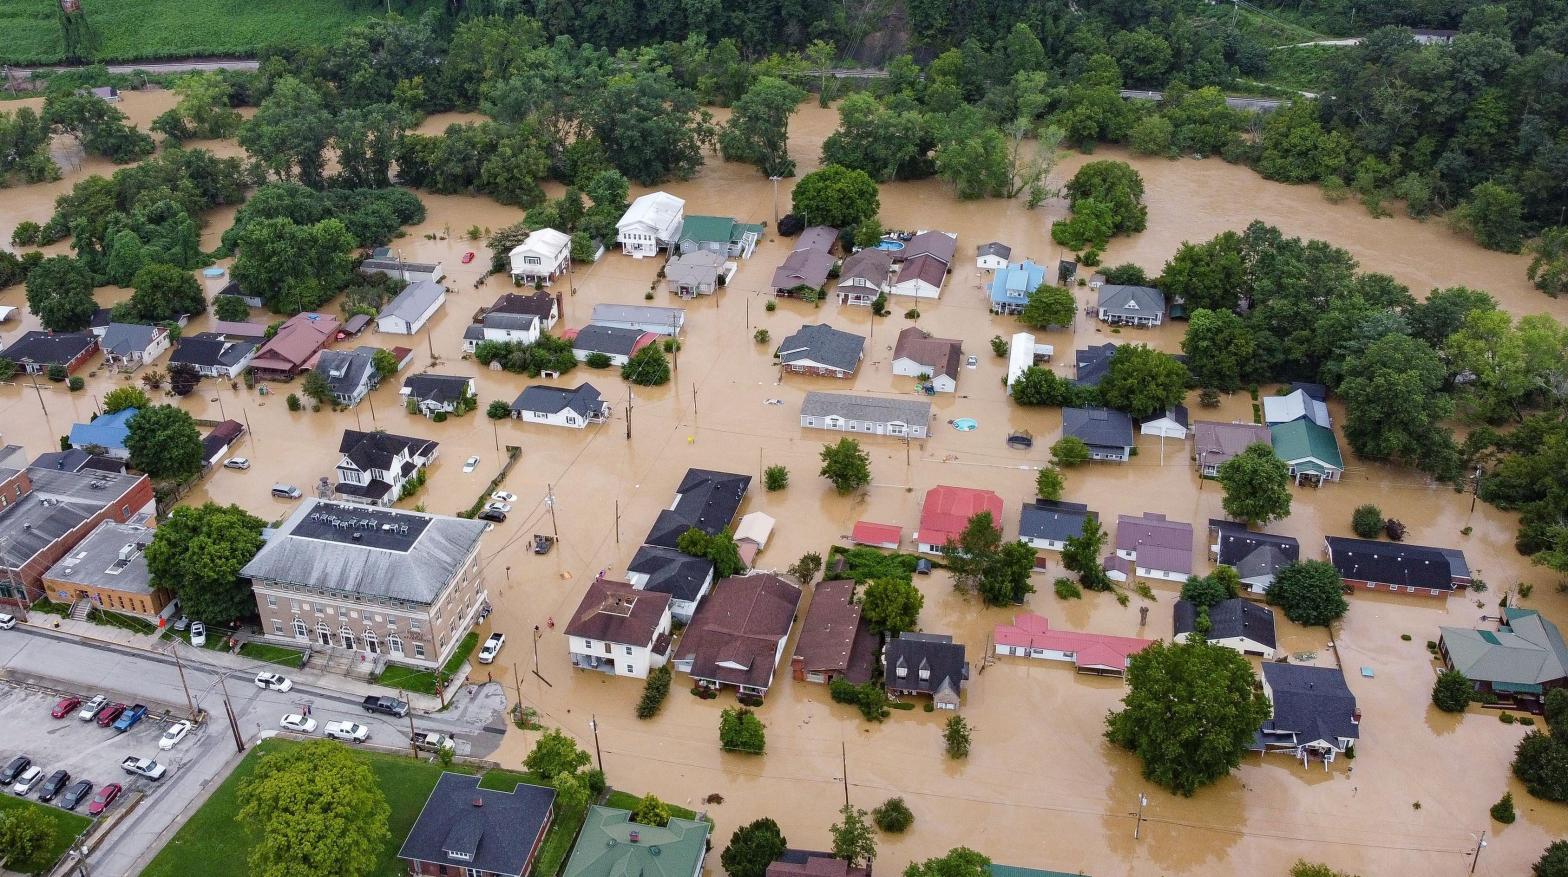 An aerial view of the flooding in Jackson, Kentucky. (Photo: Leandro Lozada / AFP, Getty Images)